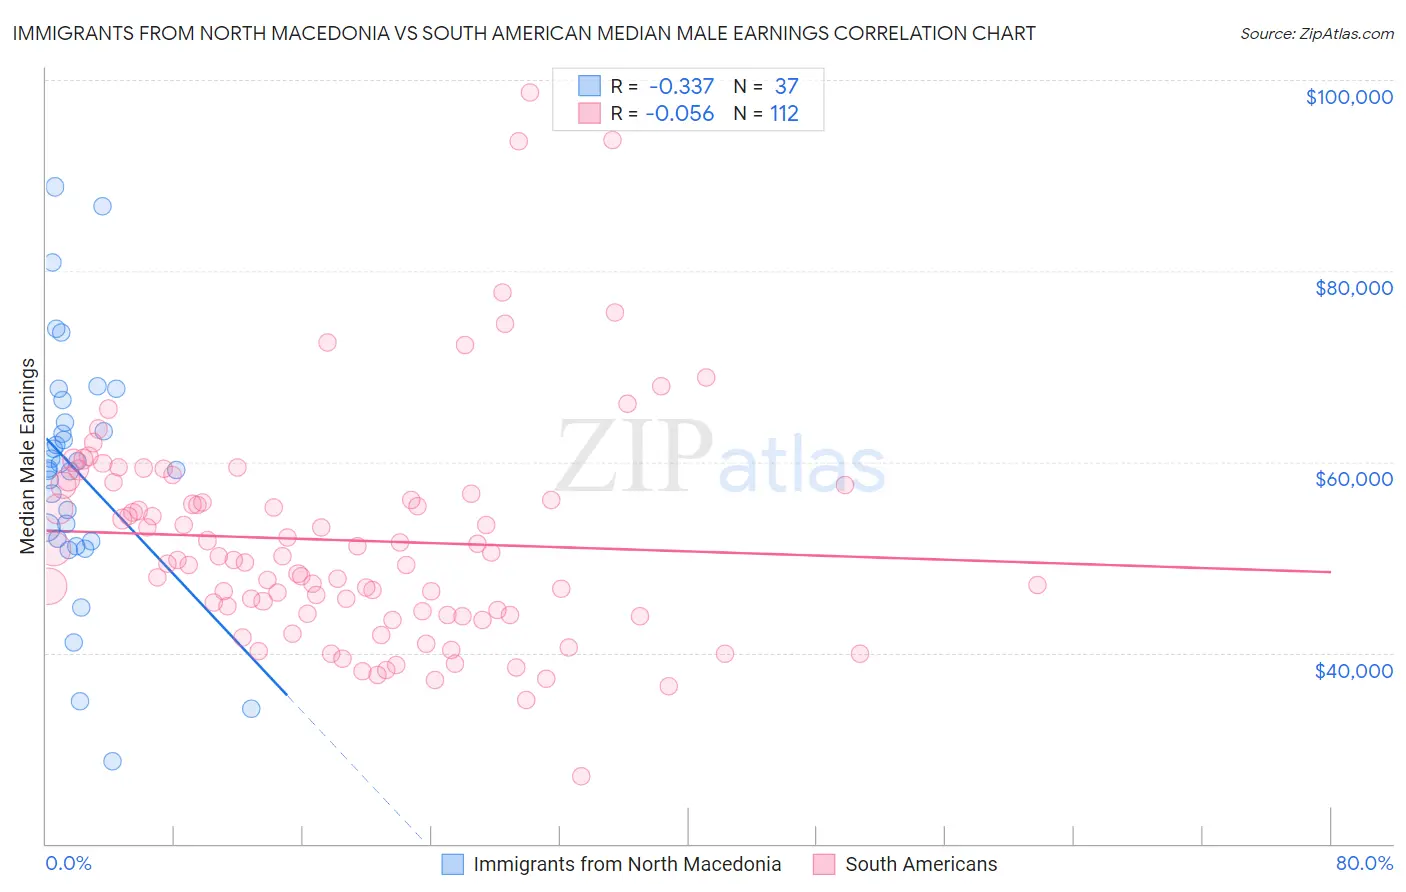 Immigrants from North Macedonia vs South American Median Male Earnings